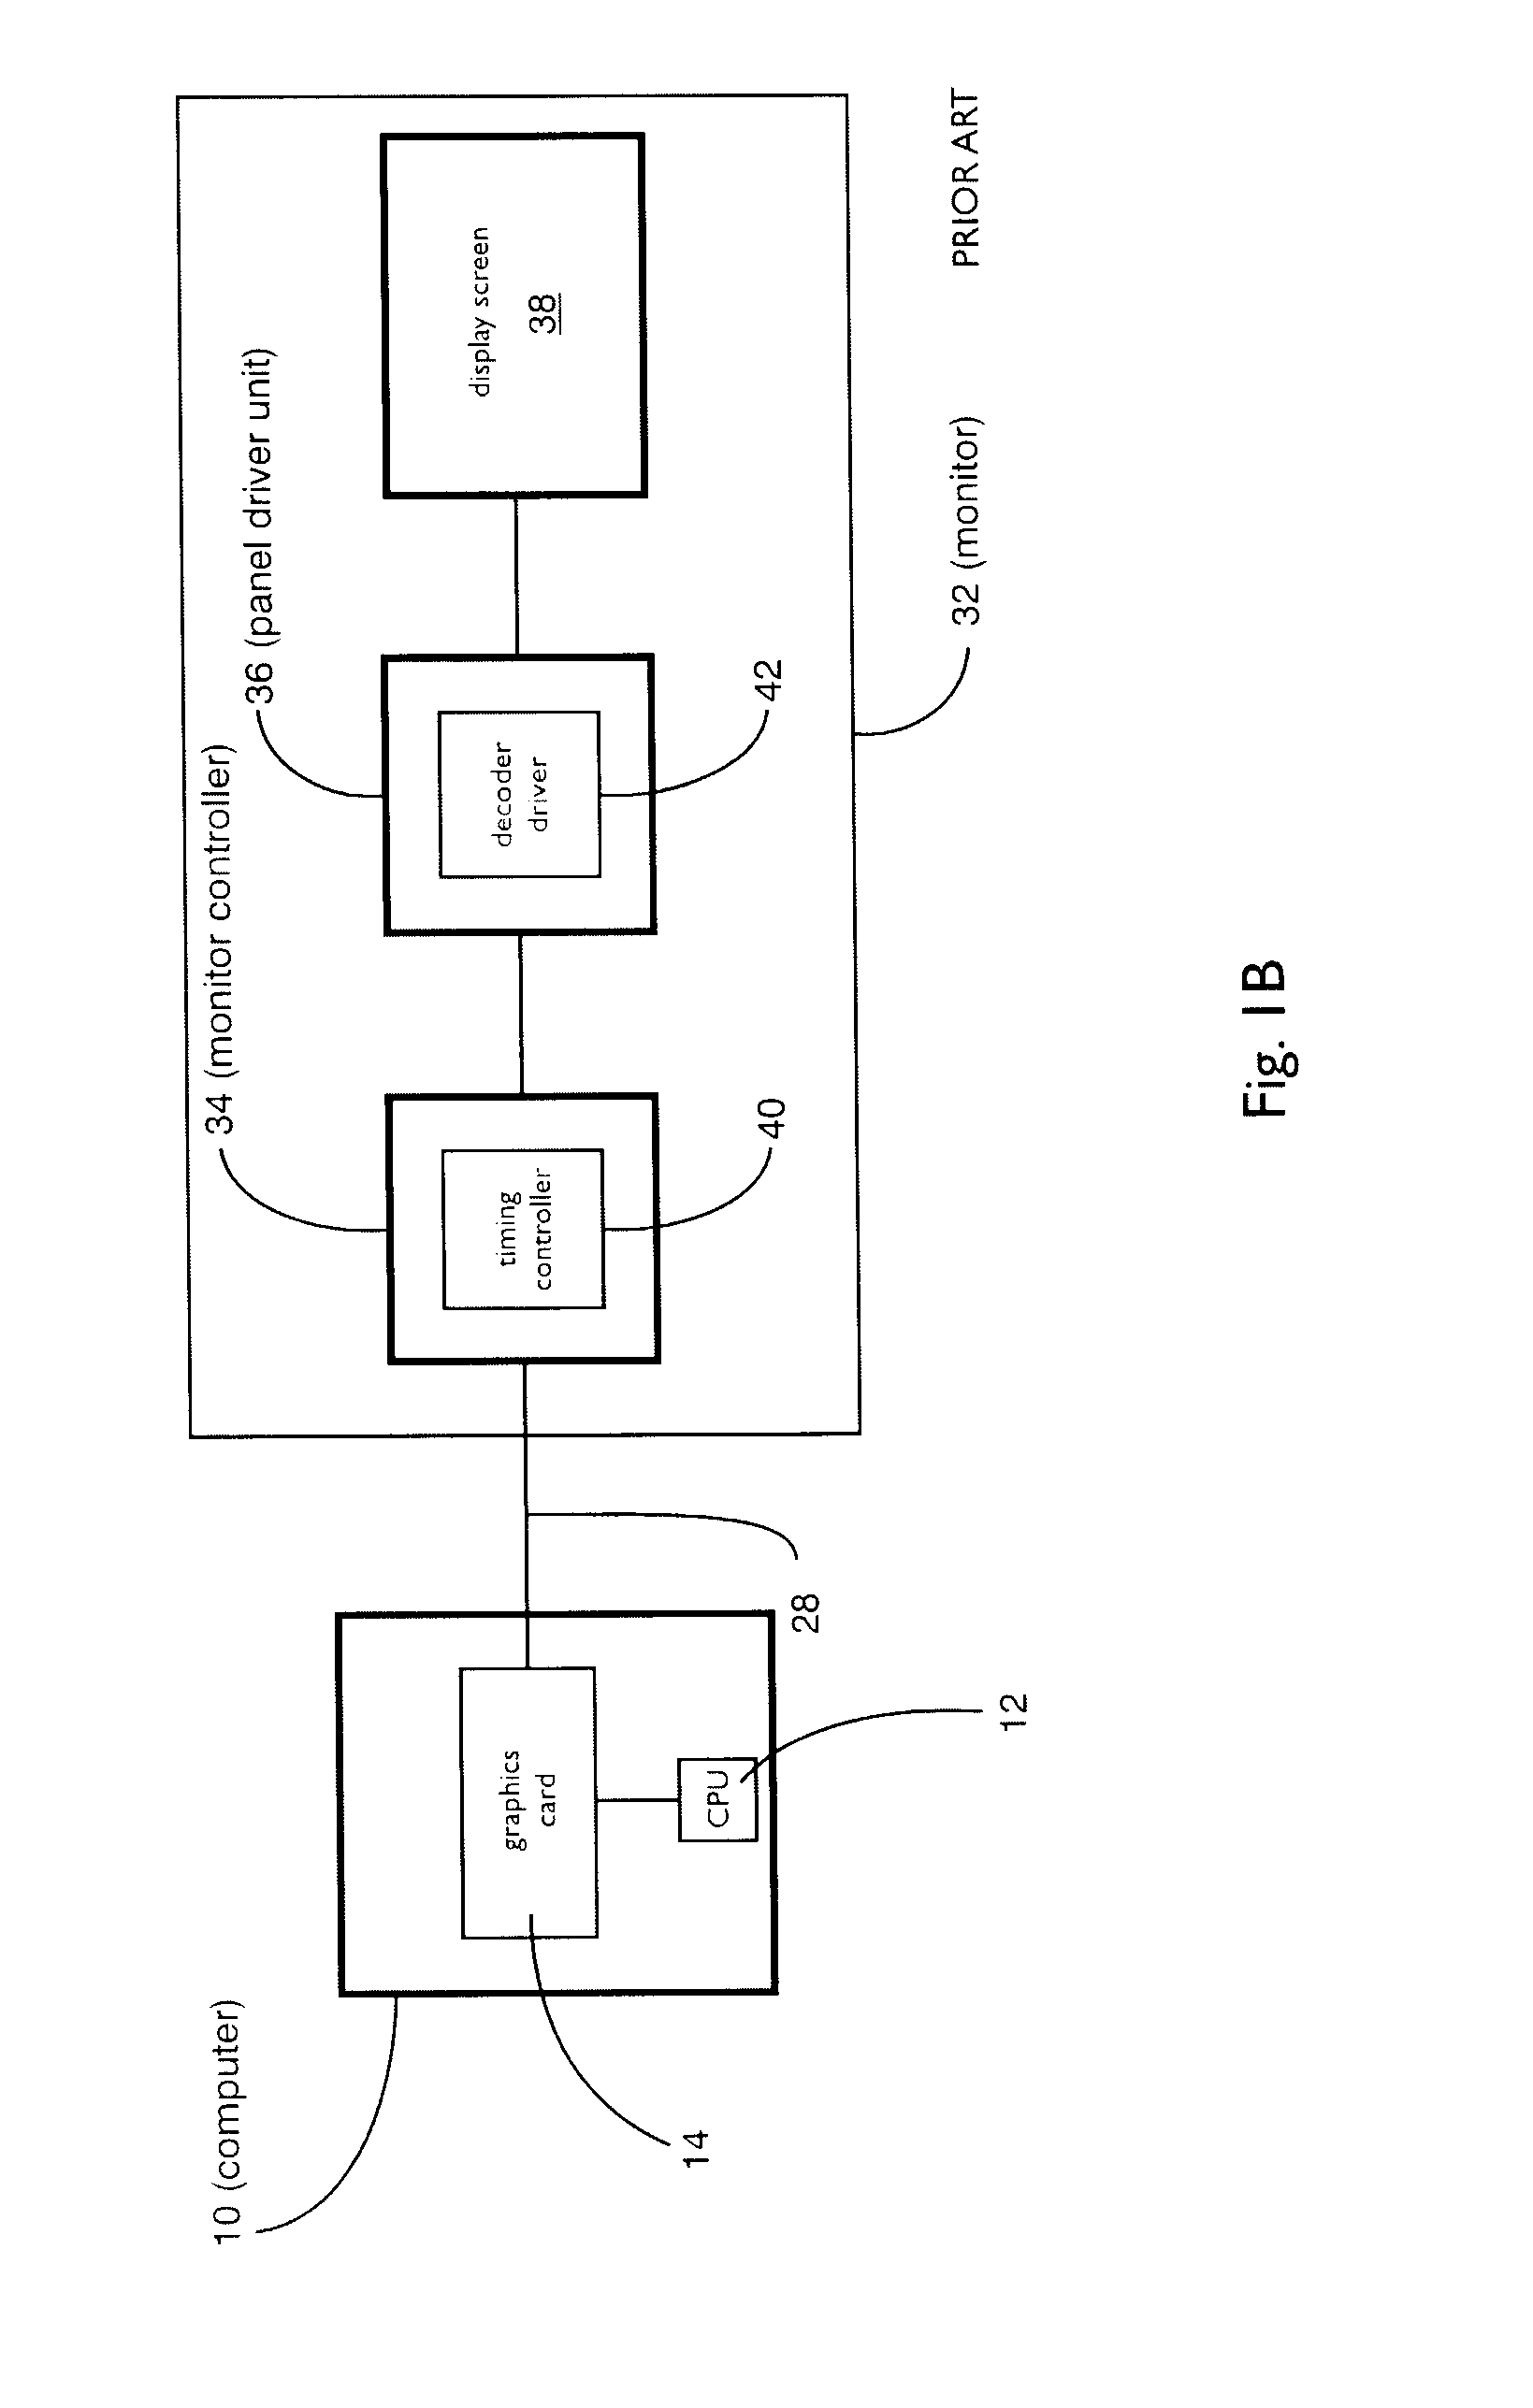 System and Method for Displaying Computer Data in a Multi-Screen Display System